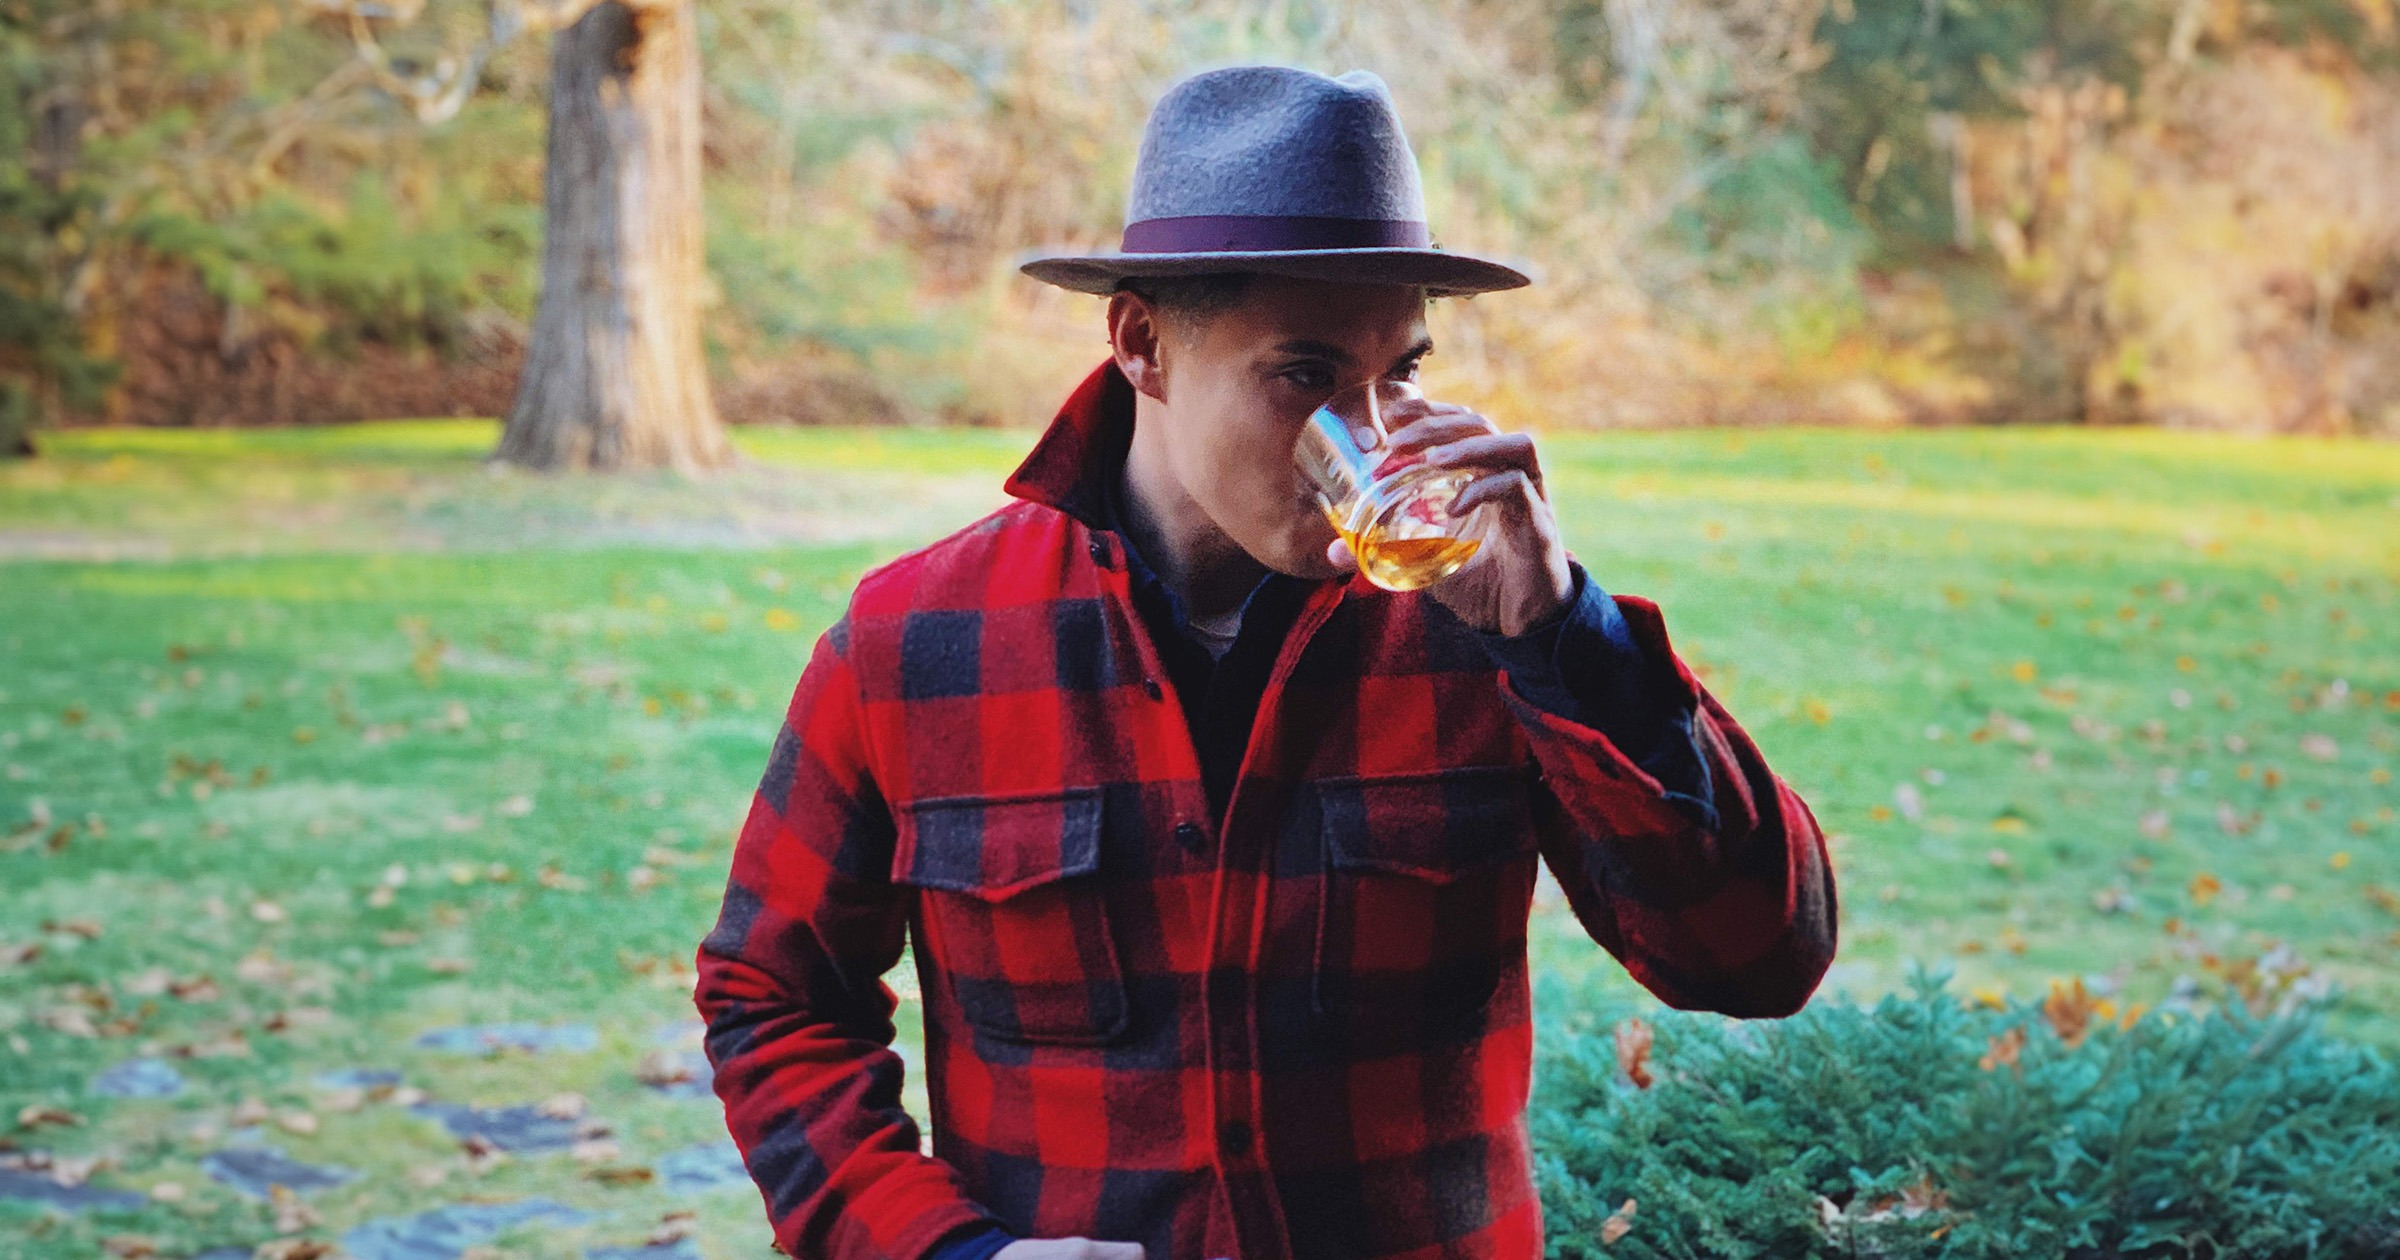 Flannel vs Plaid Vs Checkered: What’s The Difference? (Ask An Effortless Gent)